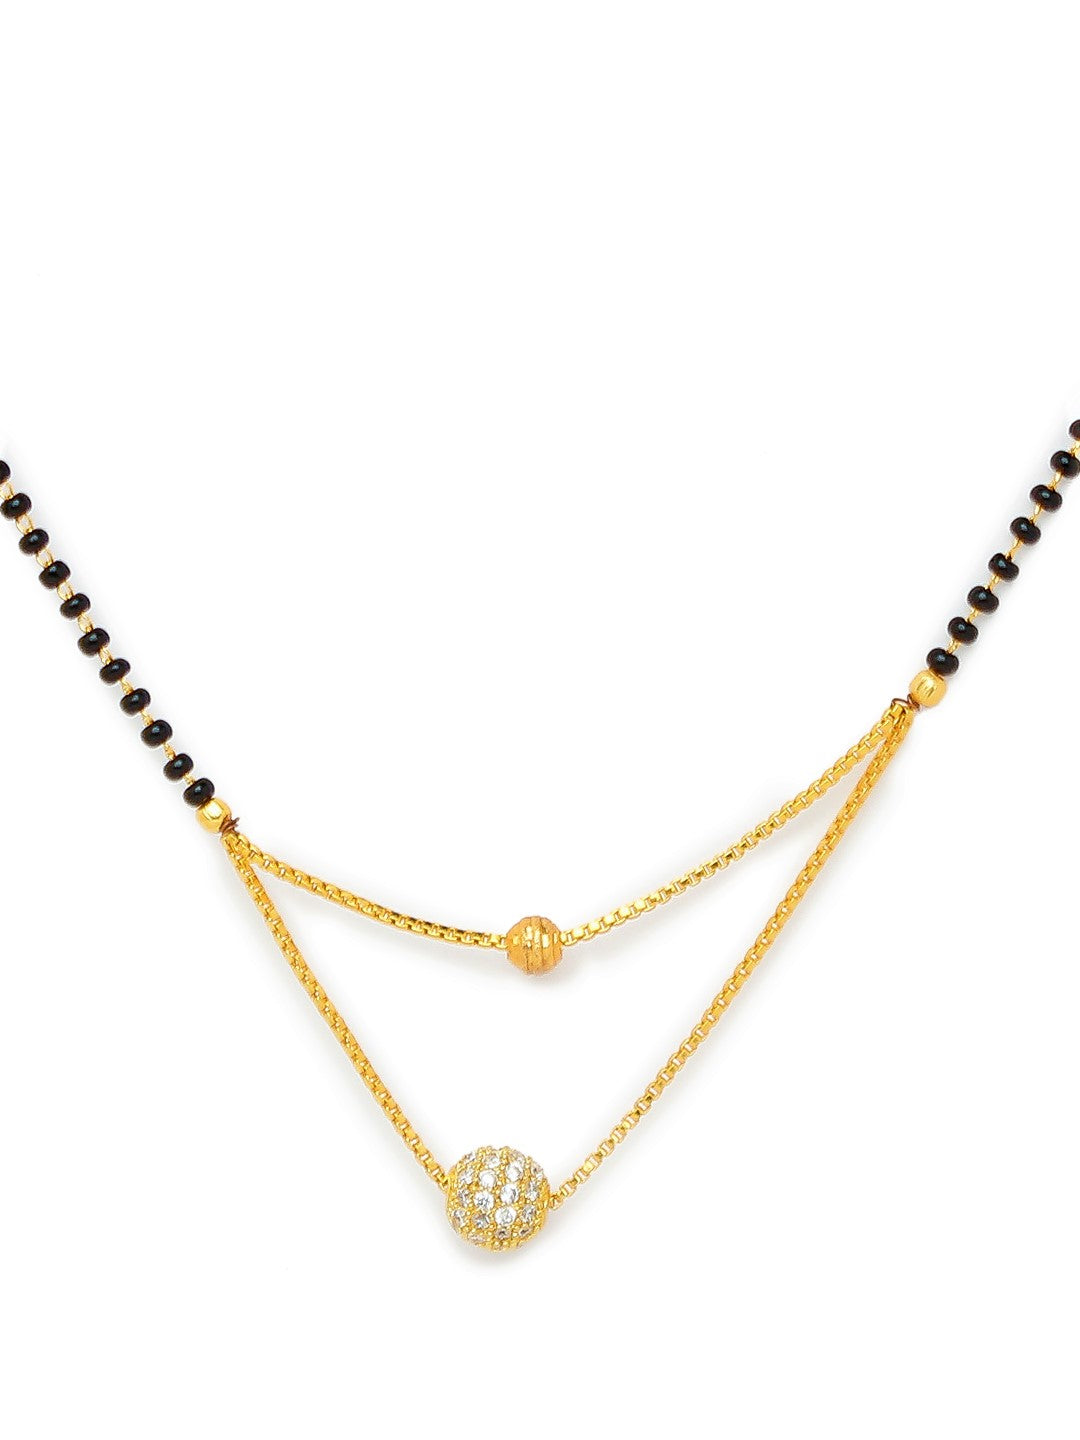 Combo Set of 2 Gold Plated Long Mangalsutra Designs and Short Mangalsutra Designs Ball Shape Pendant